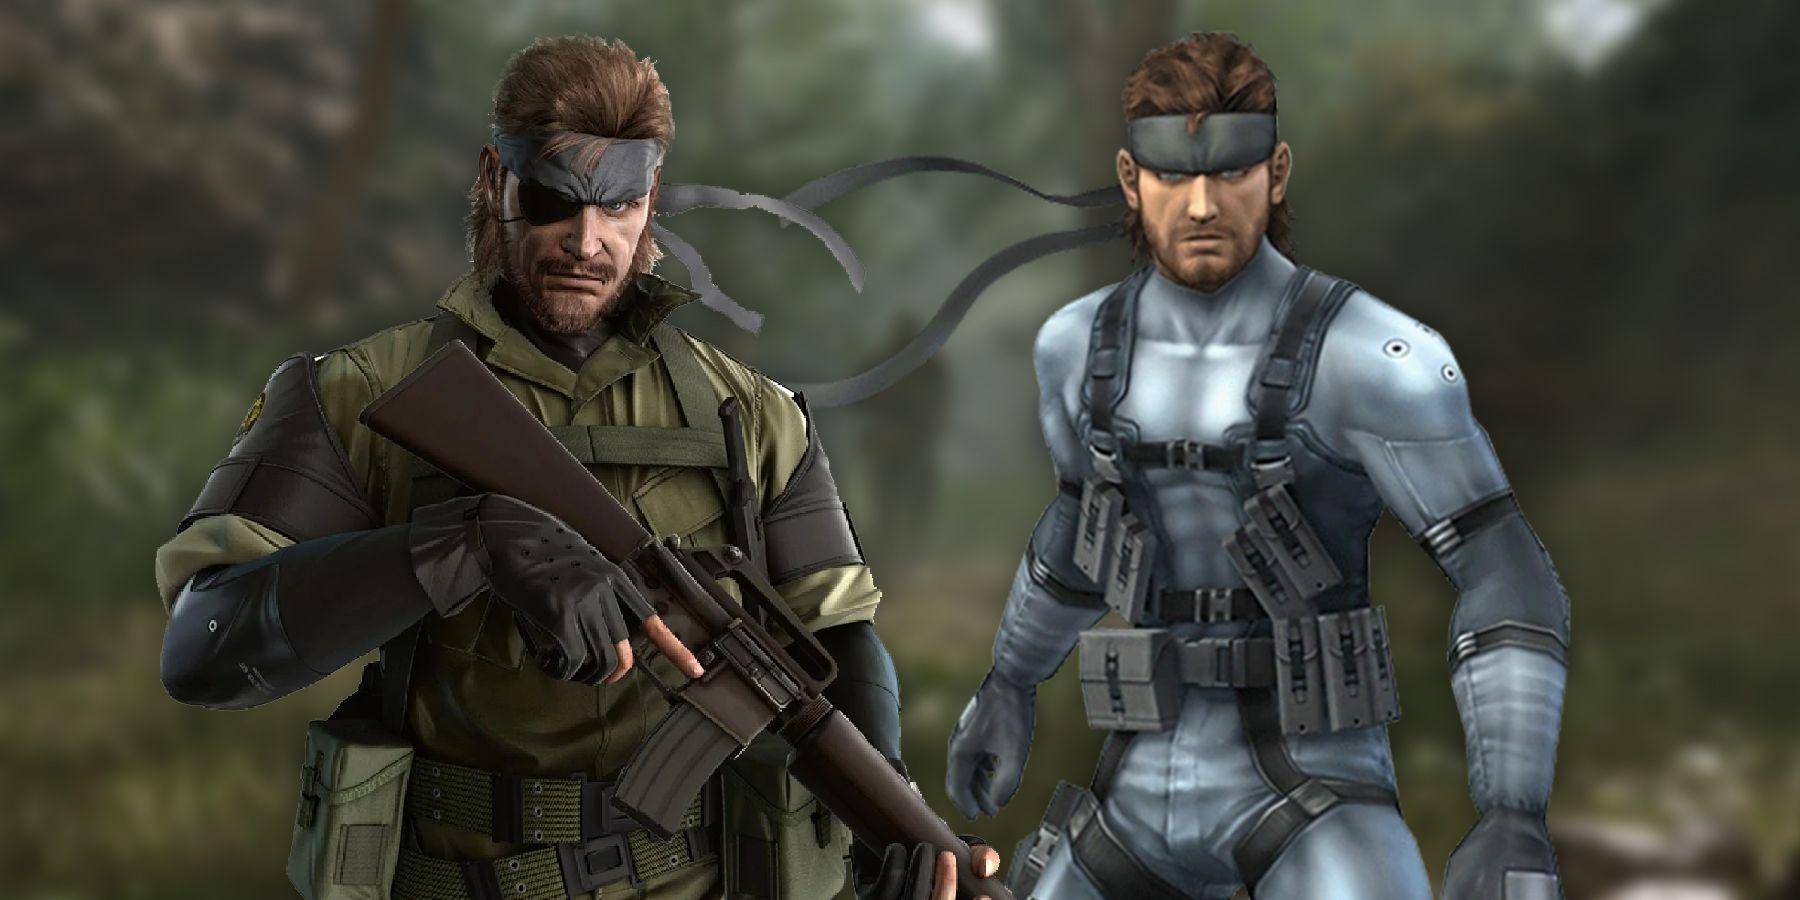 metal-gear-solid-naked-snake-solid-snake-differences